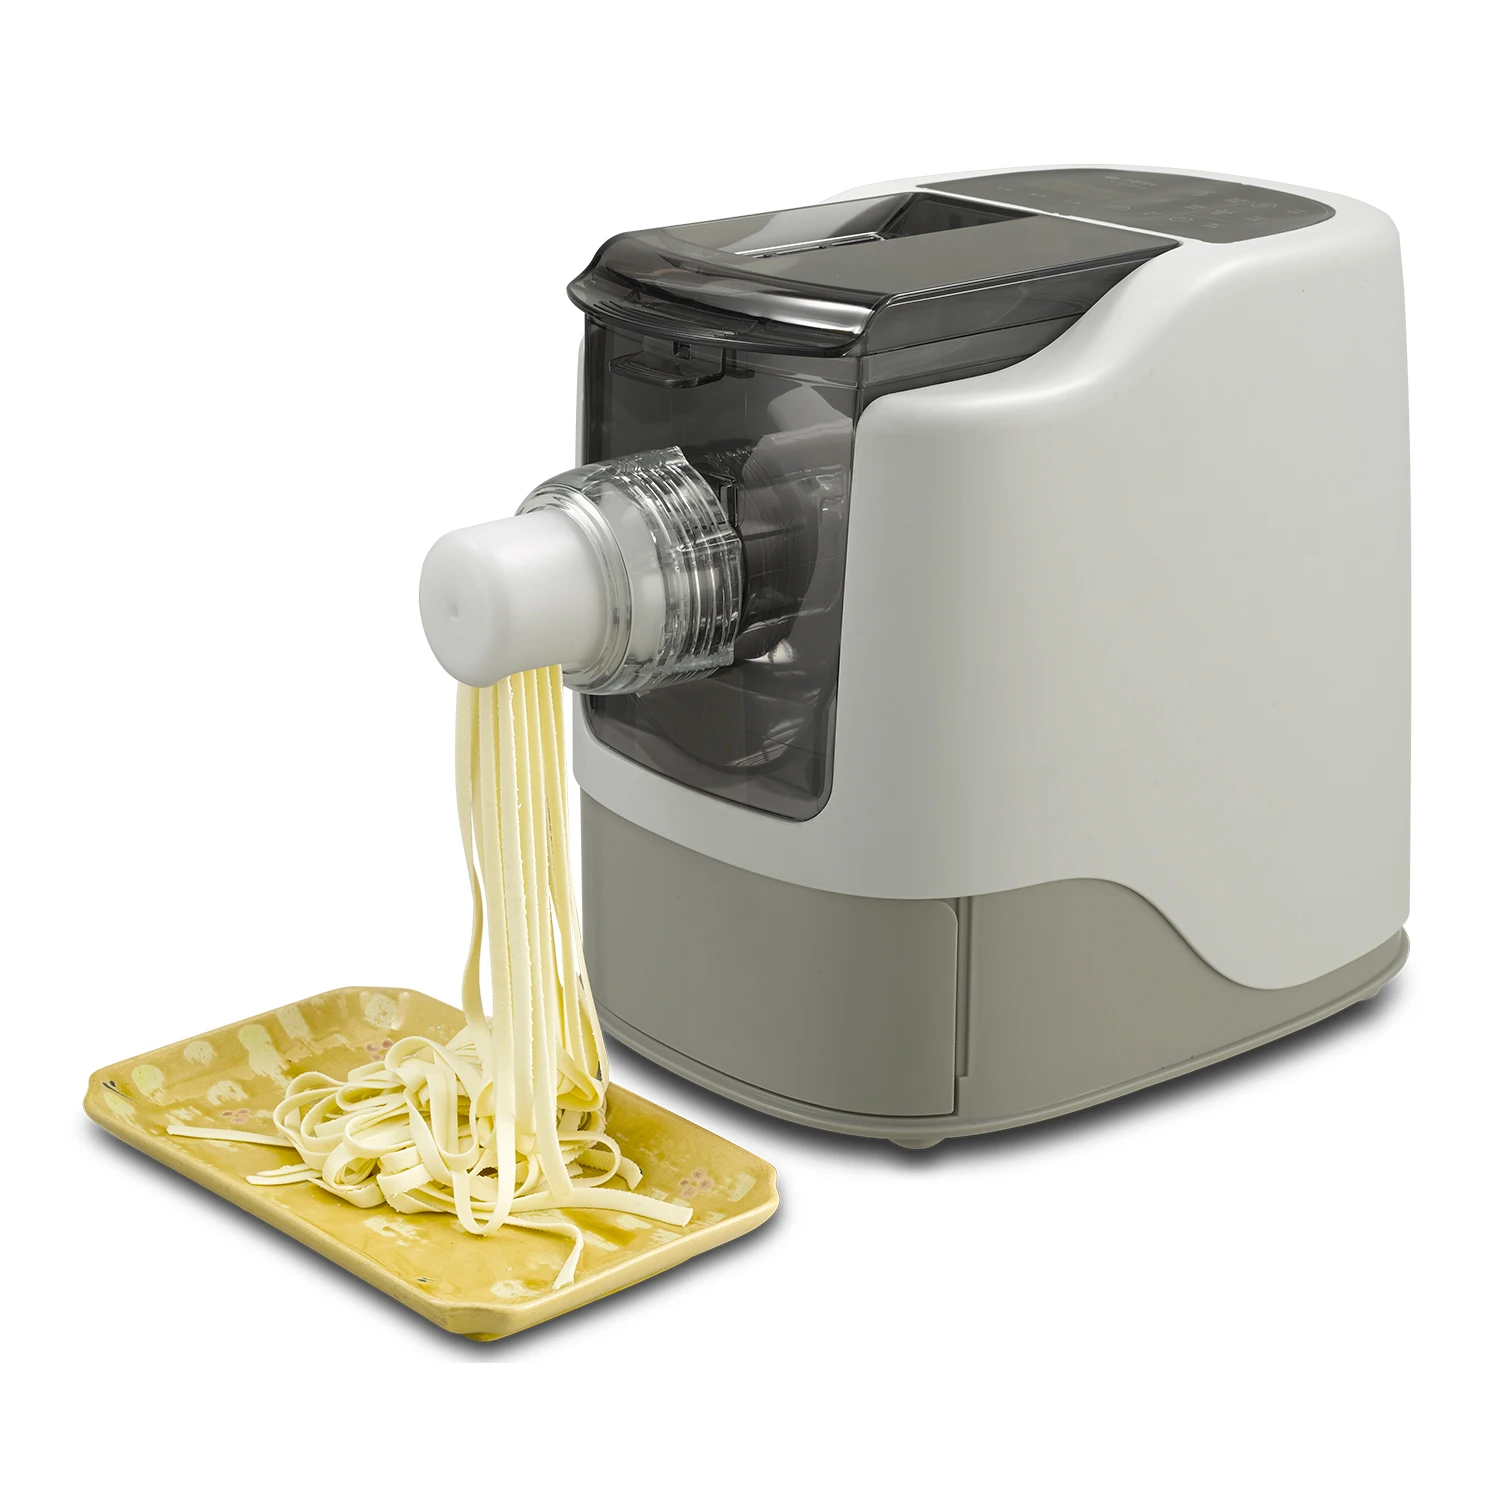 Electric Noodle Machine Household Small Full Automatic Pasta